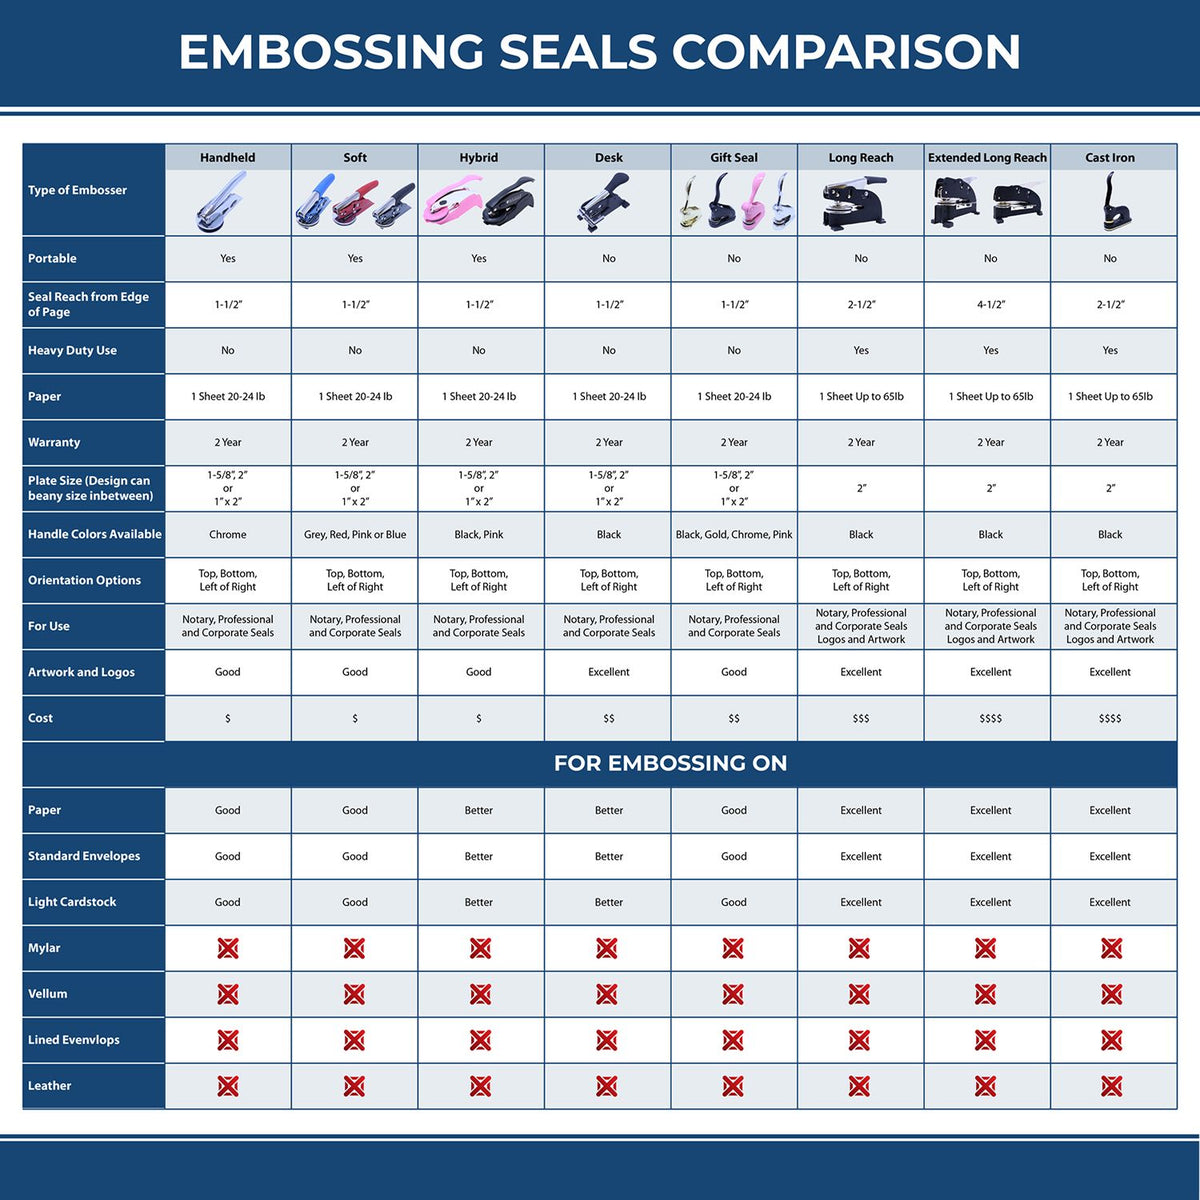 A comparison chart for the different types of mount models available for the Heavy Duty Cast Iron Kansas Land Surveyor Seal Embosser.